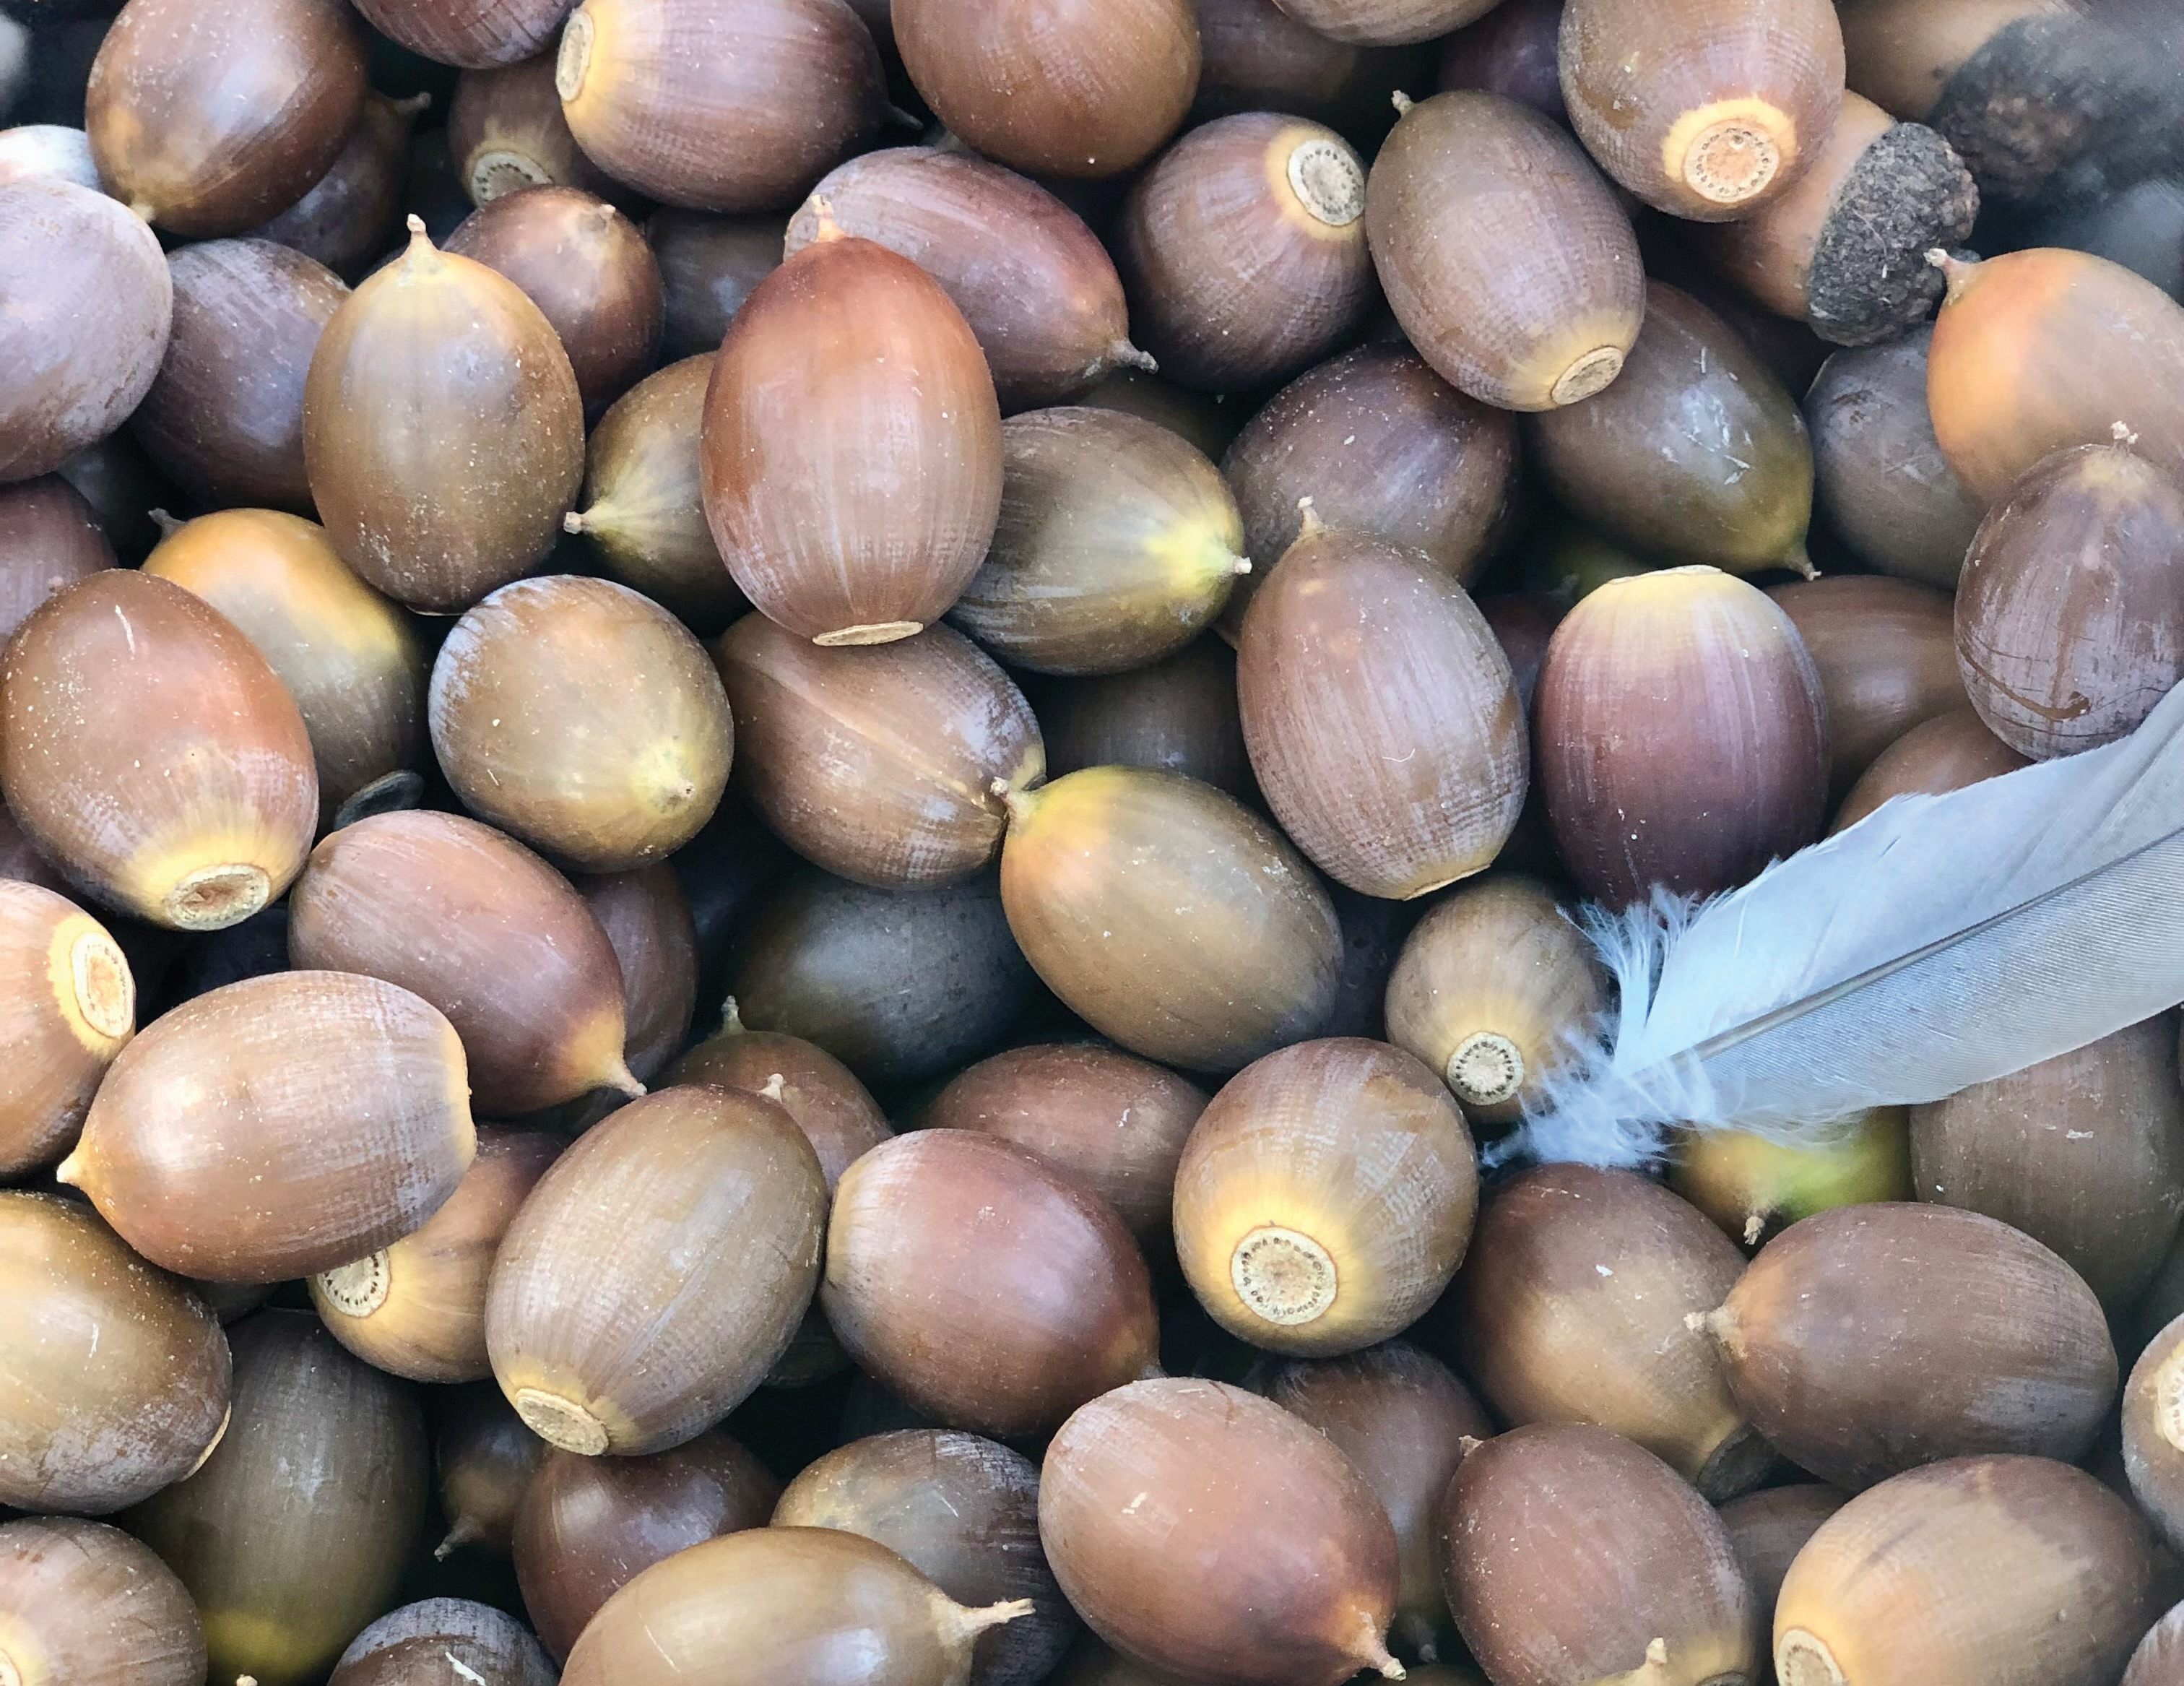 In Karuk mythology, acorns were a gift from the Creator.